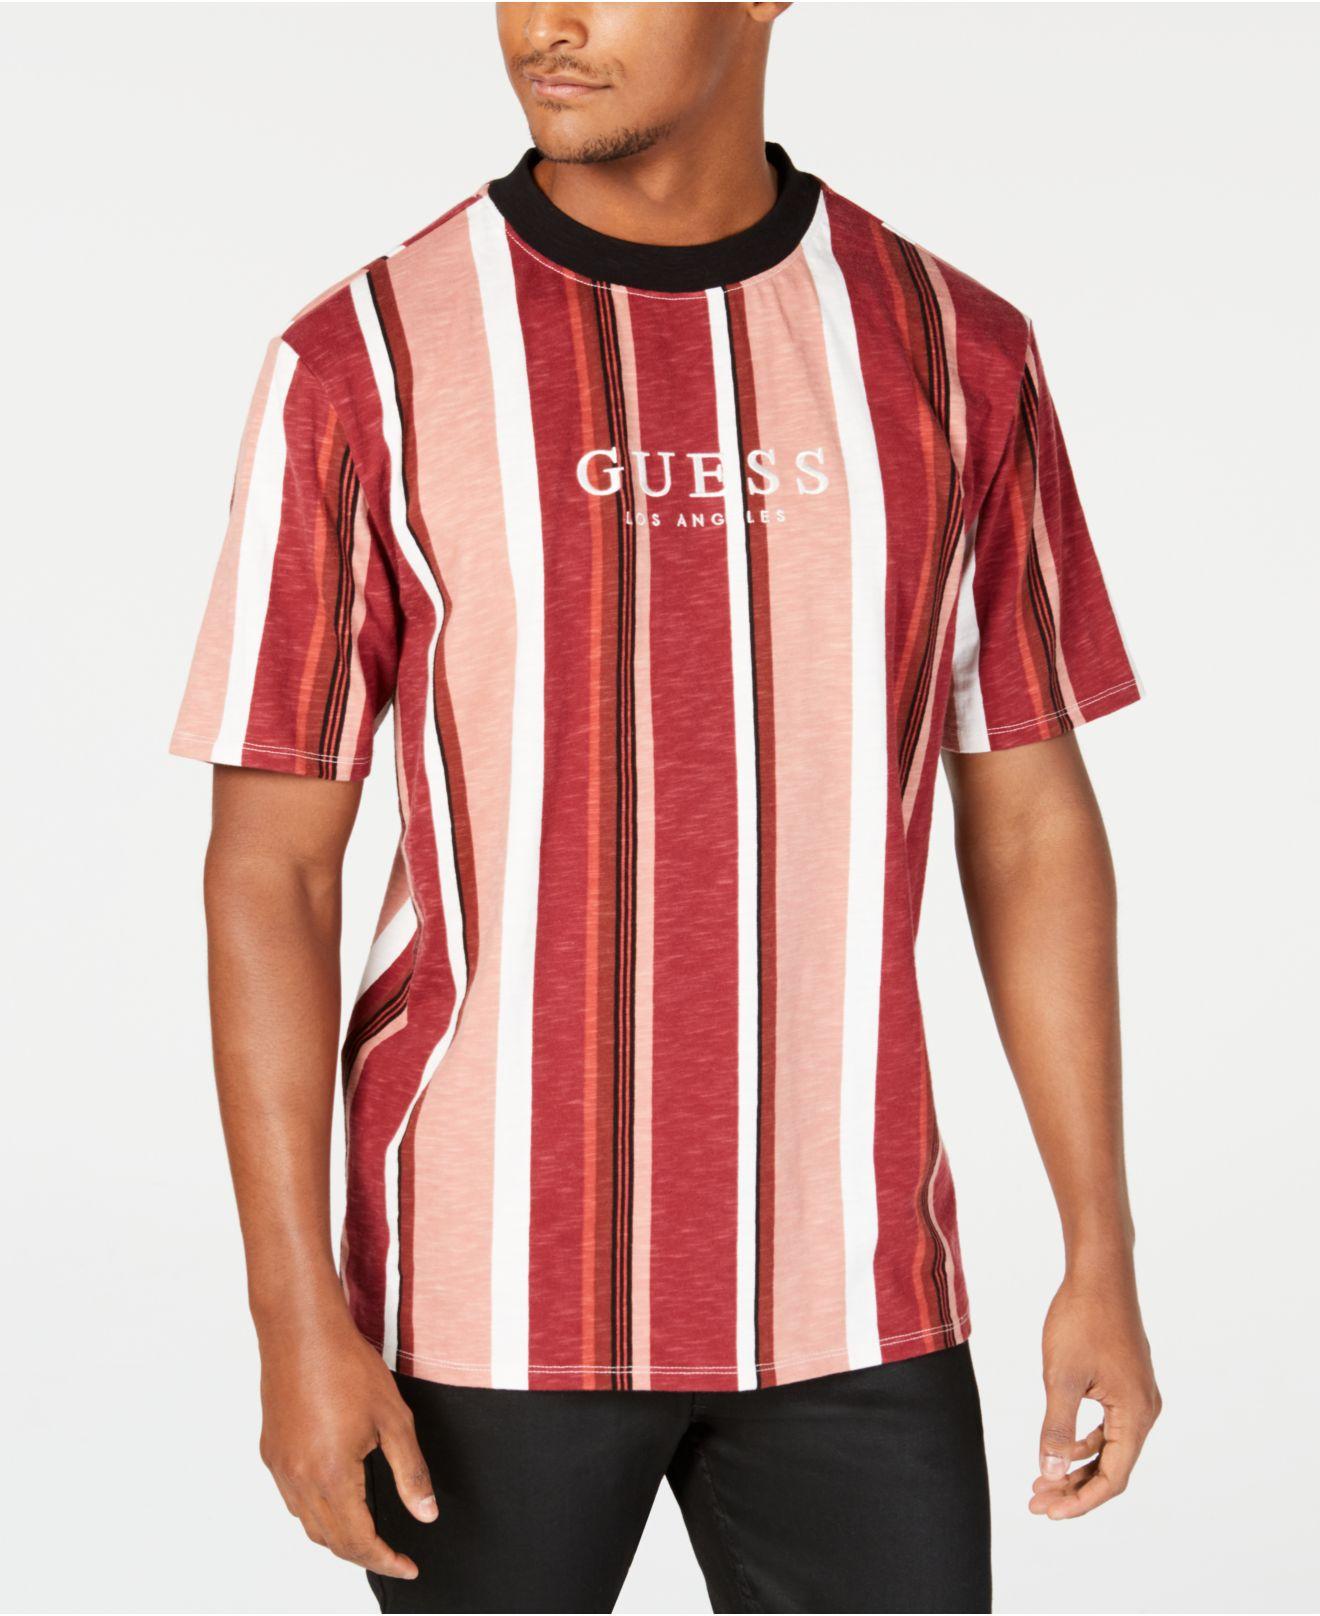 Guess Cotton Striped Logo T-shirt in Red for Men - Lyst